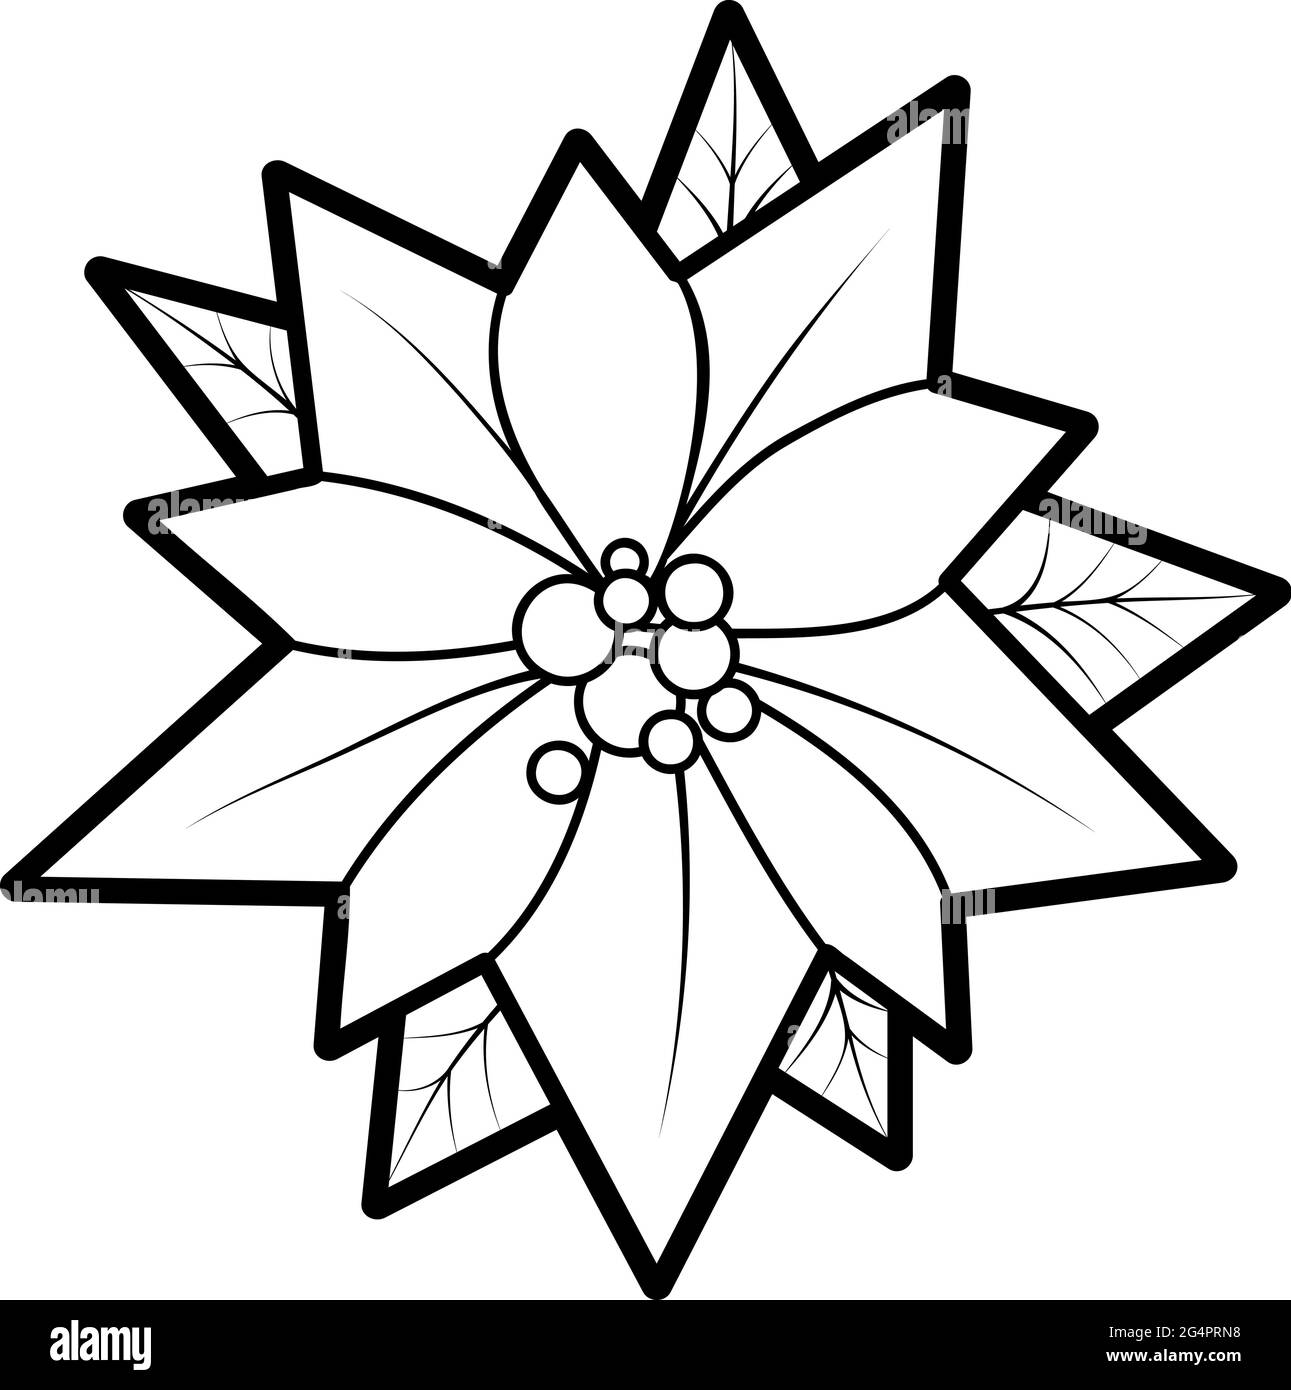 Christmas coloring book or page for kids poinsettia black and white vector illustration stock vector image art